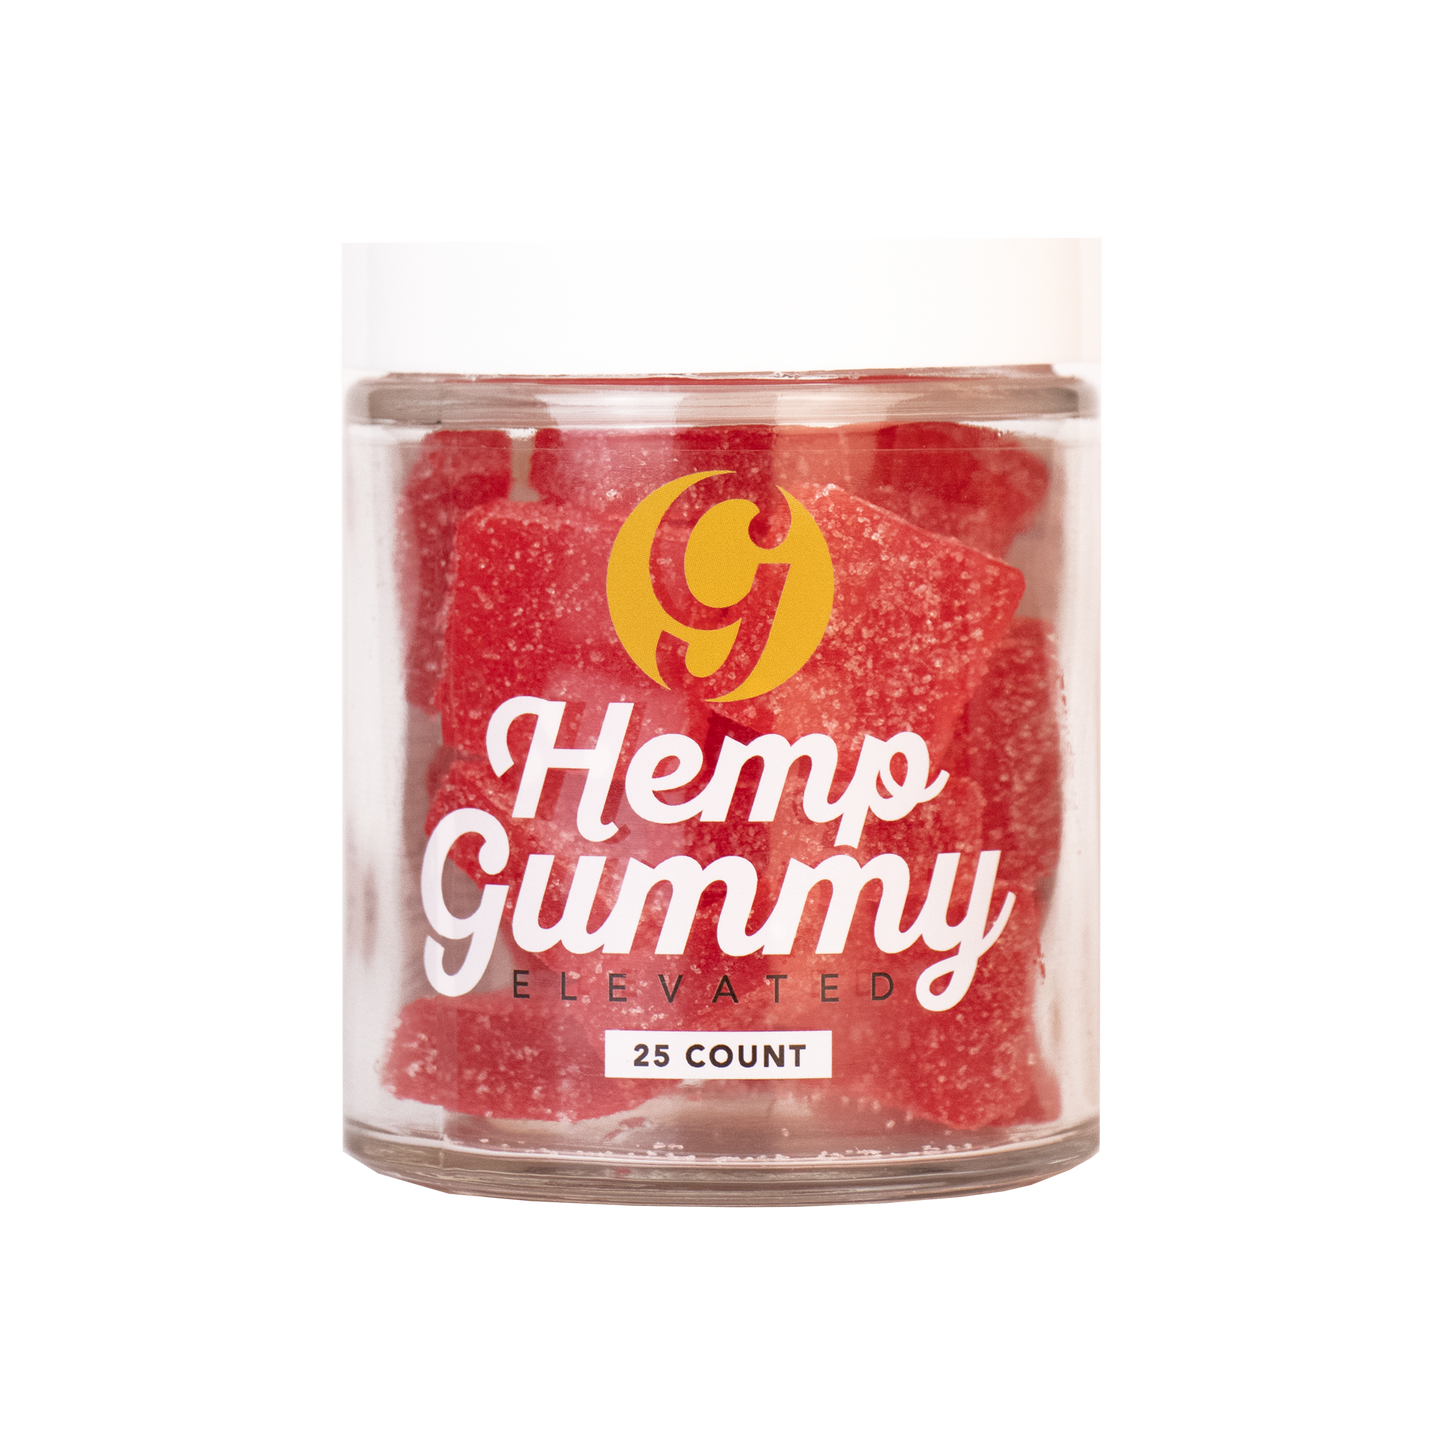 Case of 25MG Delta-8 Hemp Gummy 25 Count Jar (Qty. 12) AVAILABLE IN MULTIPLE FLAVORS